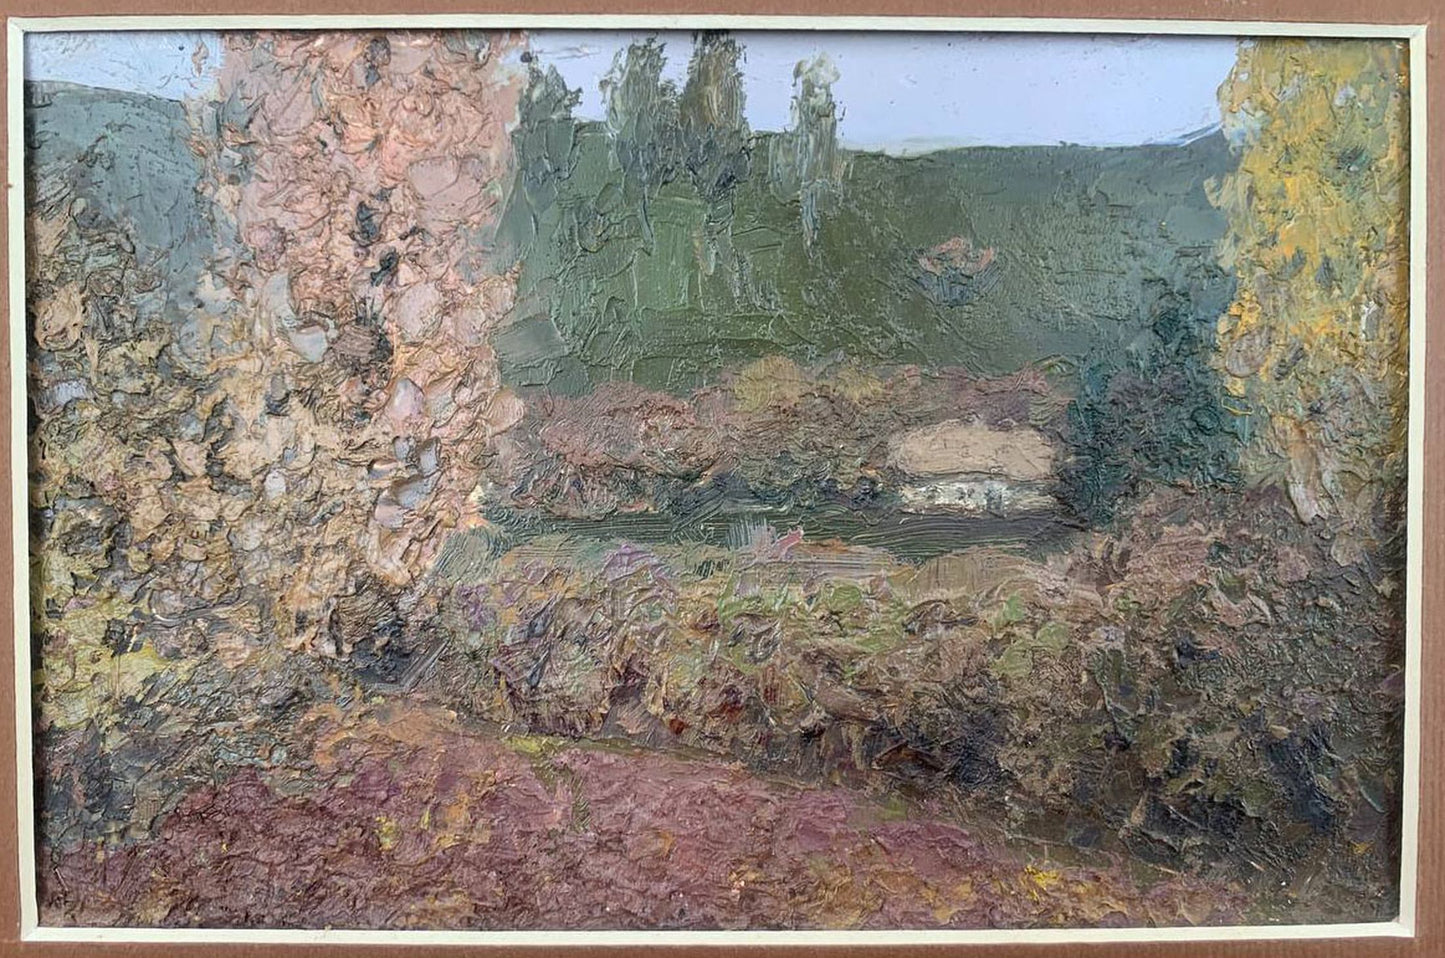 Abstract oil painting in the thick Ivan Kirillovych Tsyupka